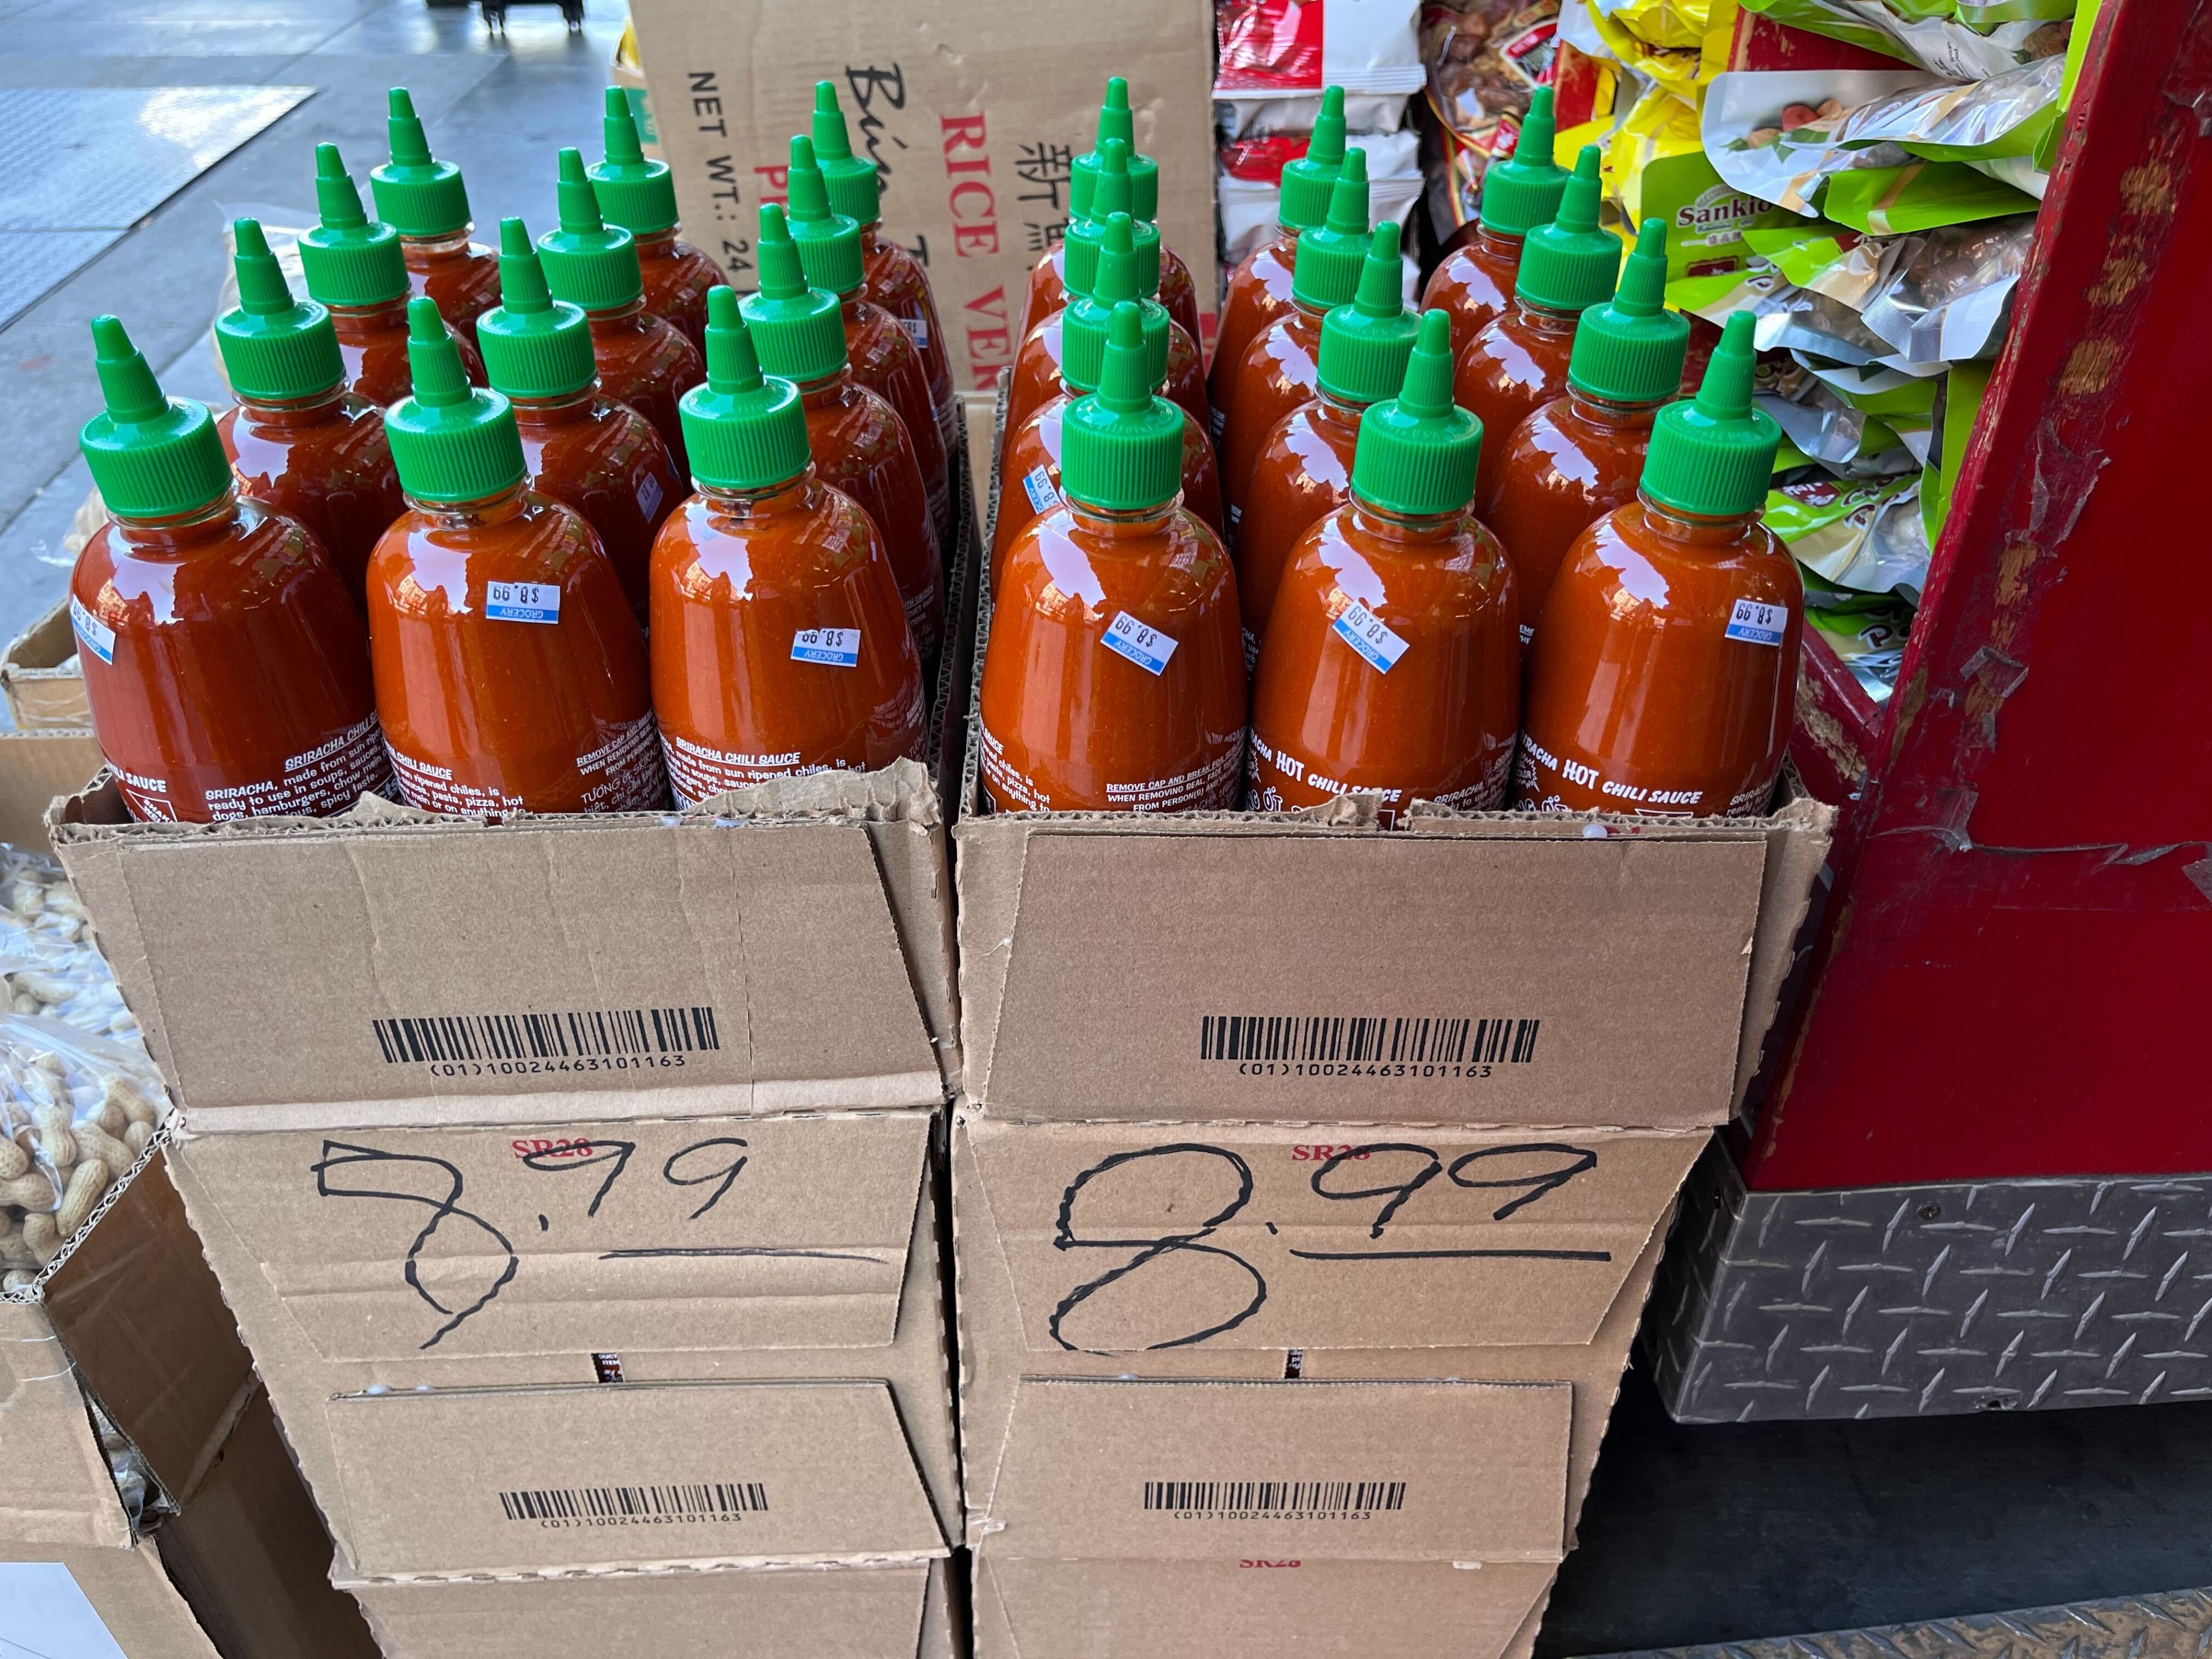 Bottles of hot chili sauce in boxes labeled with prices $7.99 and $8.99, displayed for sale.